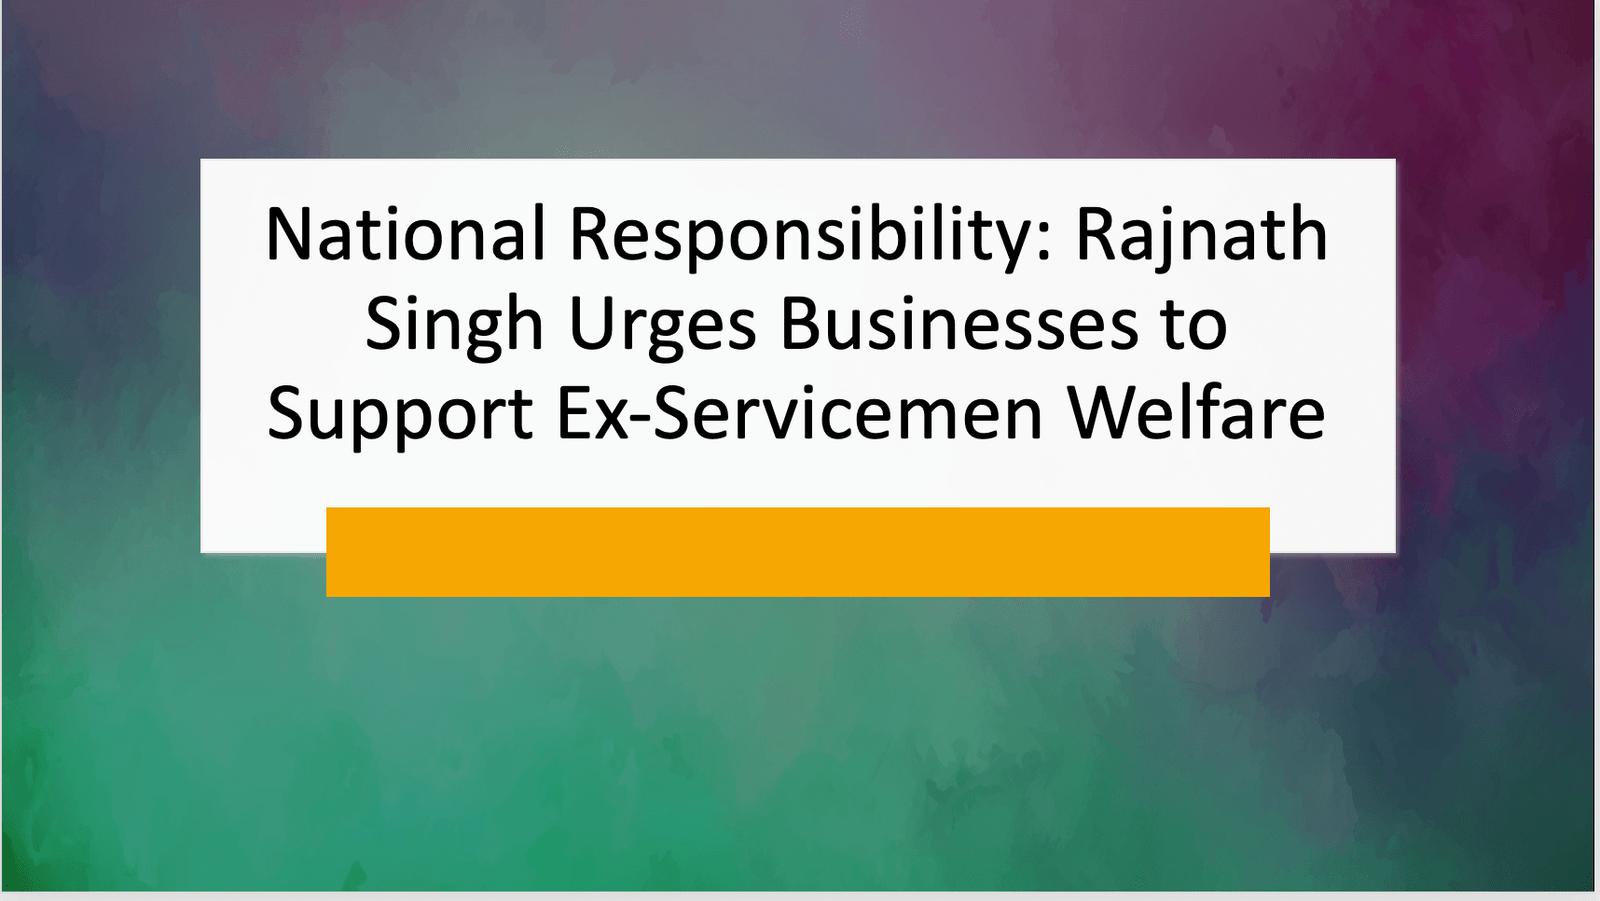 National Responsibility: Rajnath Singh Urges Businesses to Support Ex-Servicemen Welfare